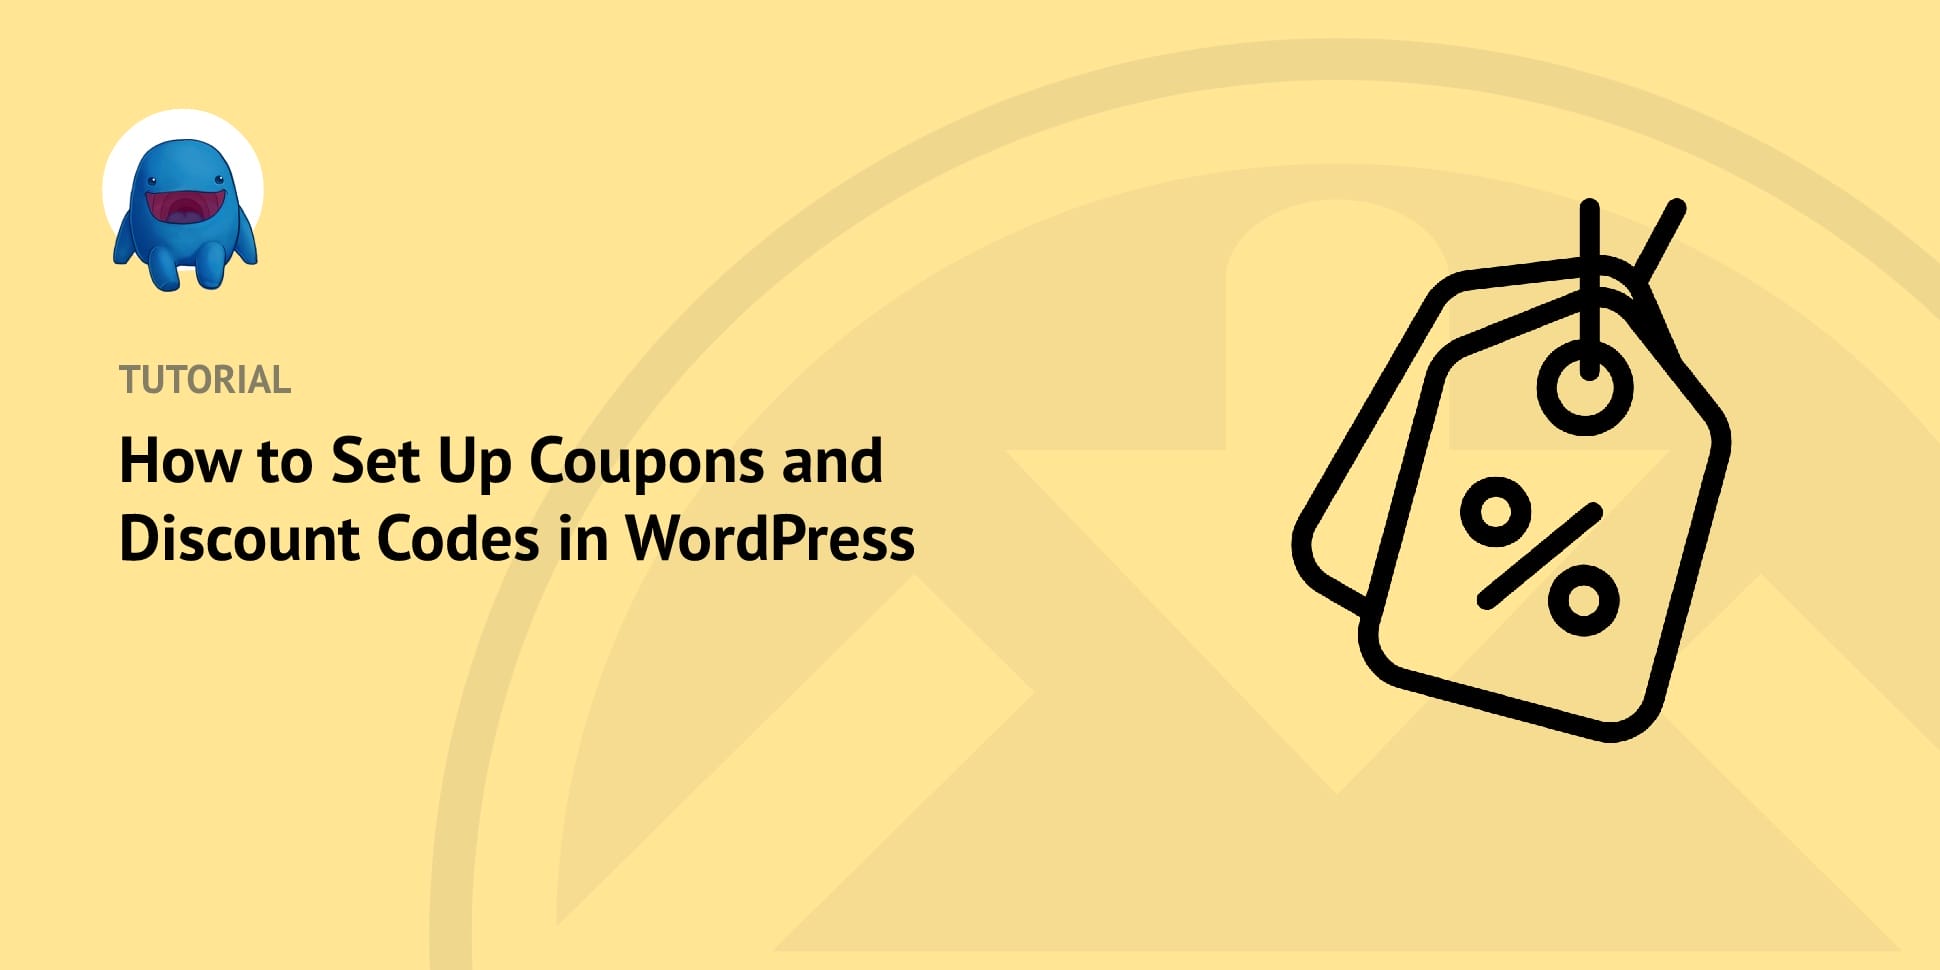 How to Set Up Coupons and Discount Codes WordPress Guide